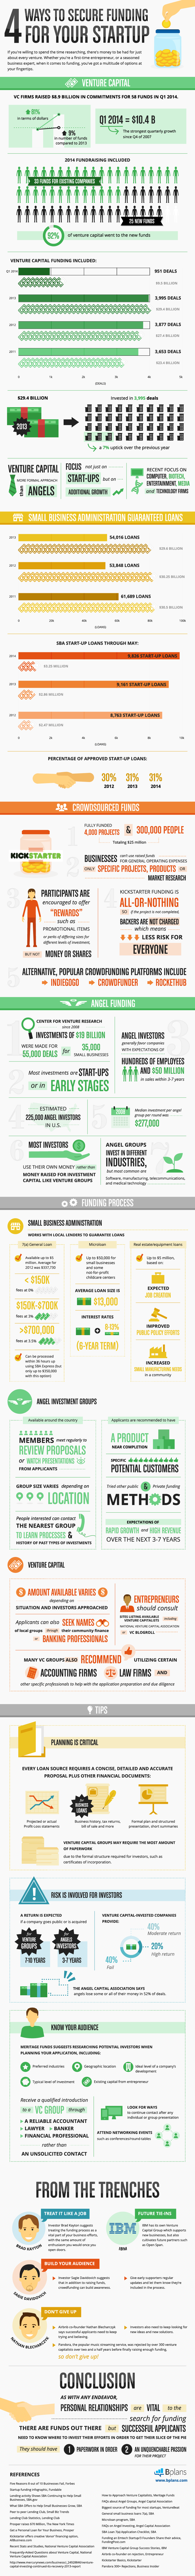 How to Secure Funding for Your Startup